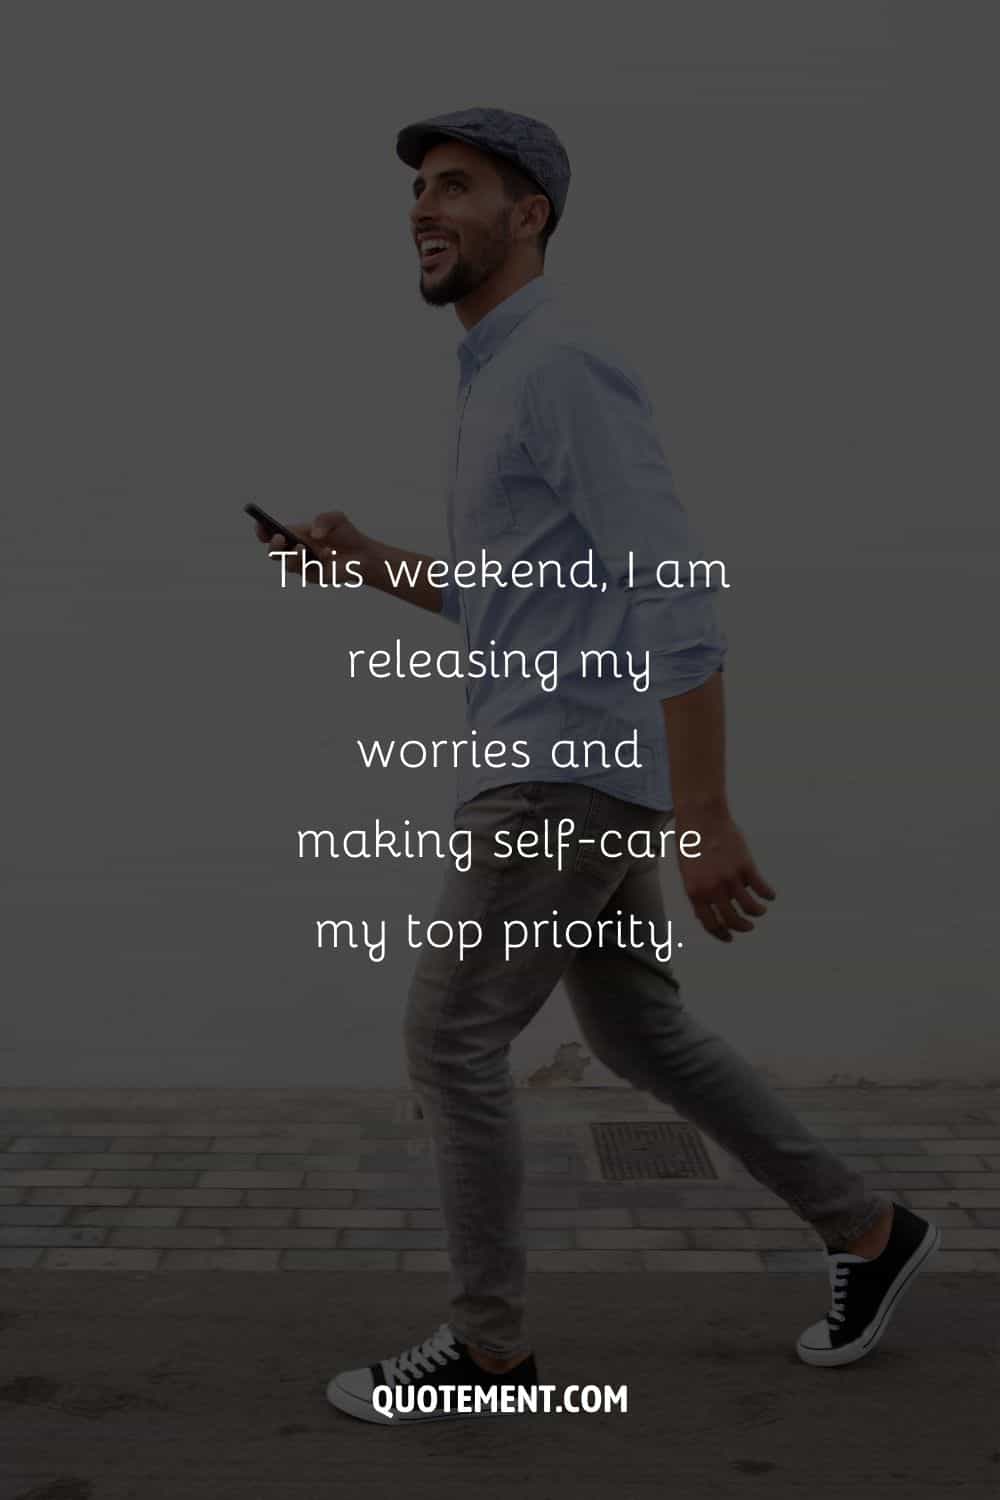 Image of a cheerful man walking representing self-care affirmation.